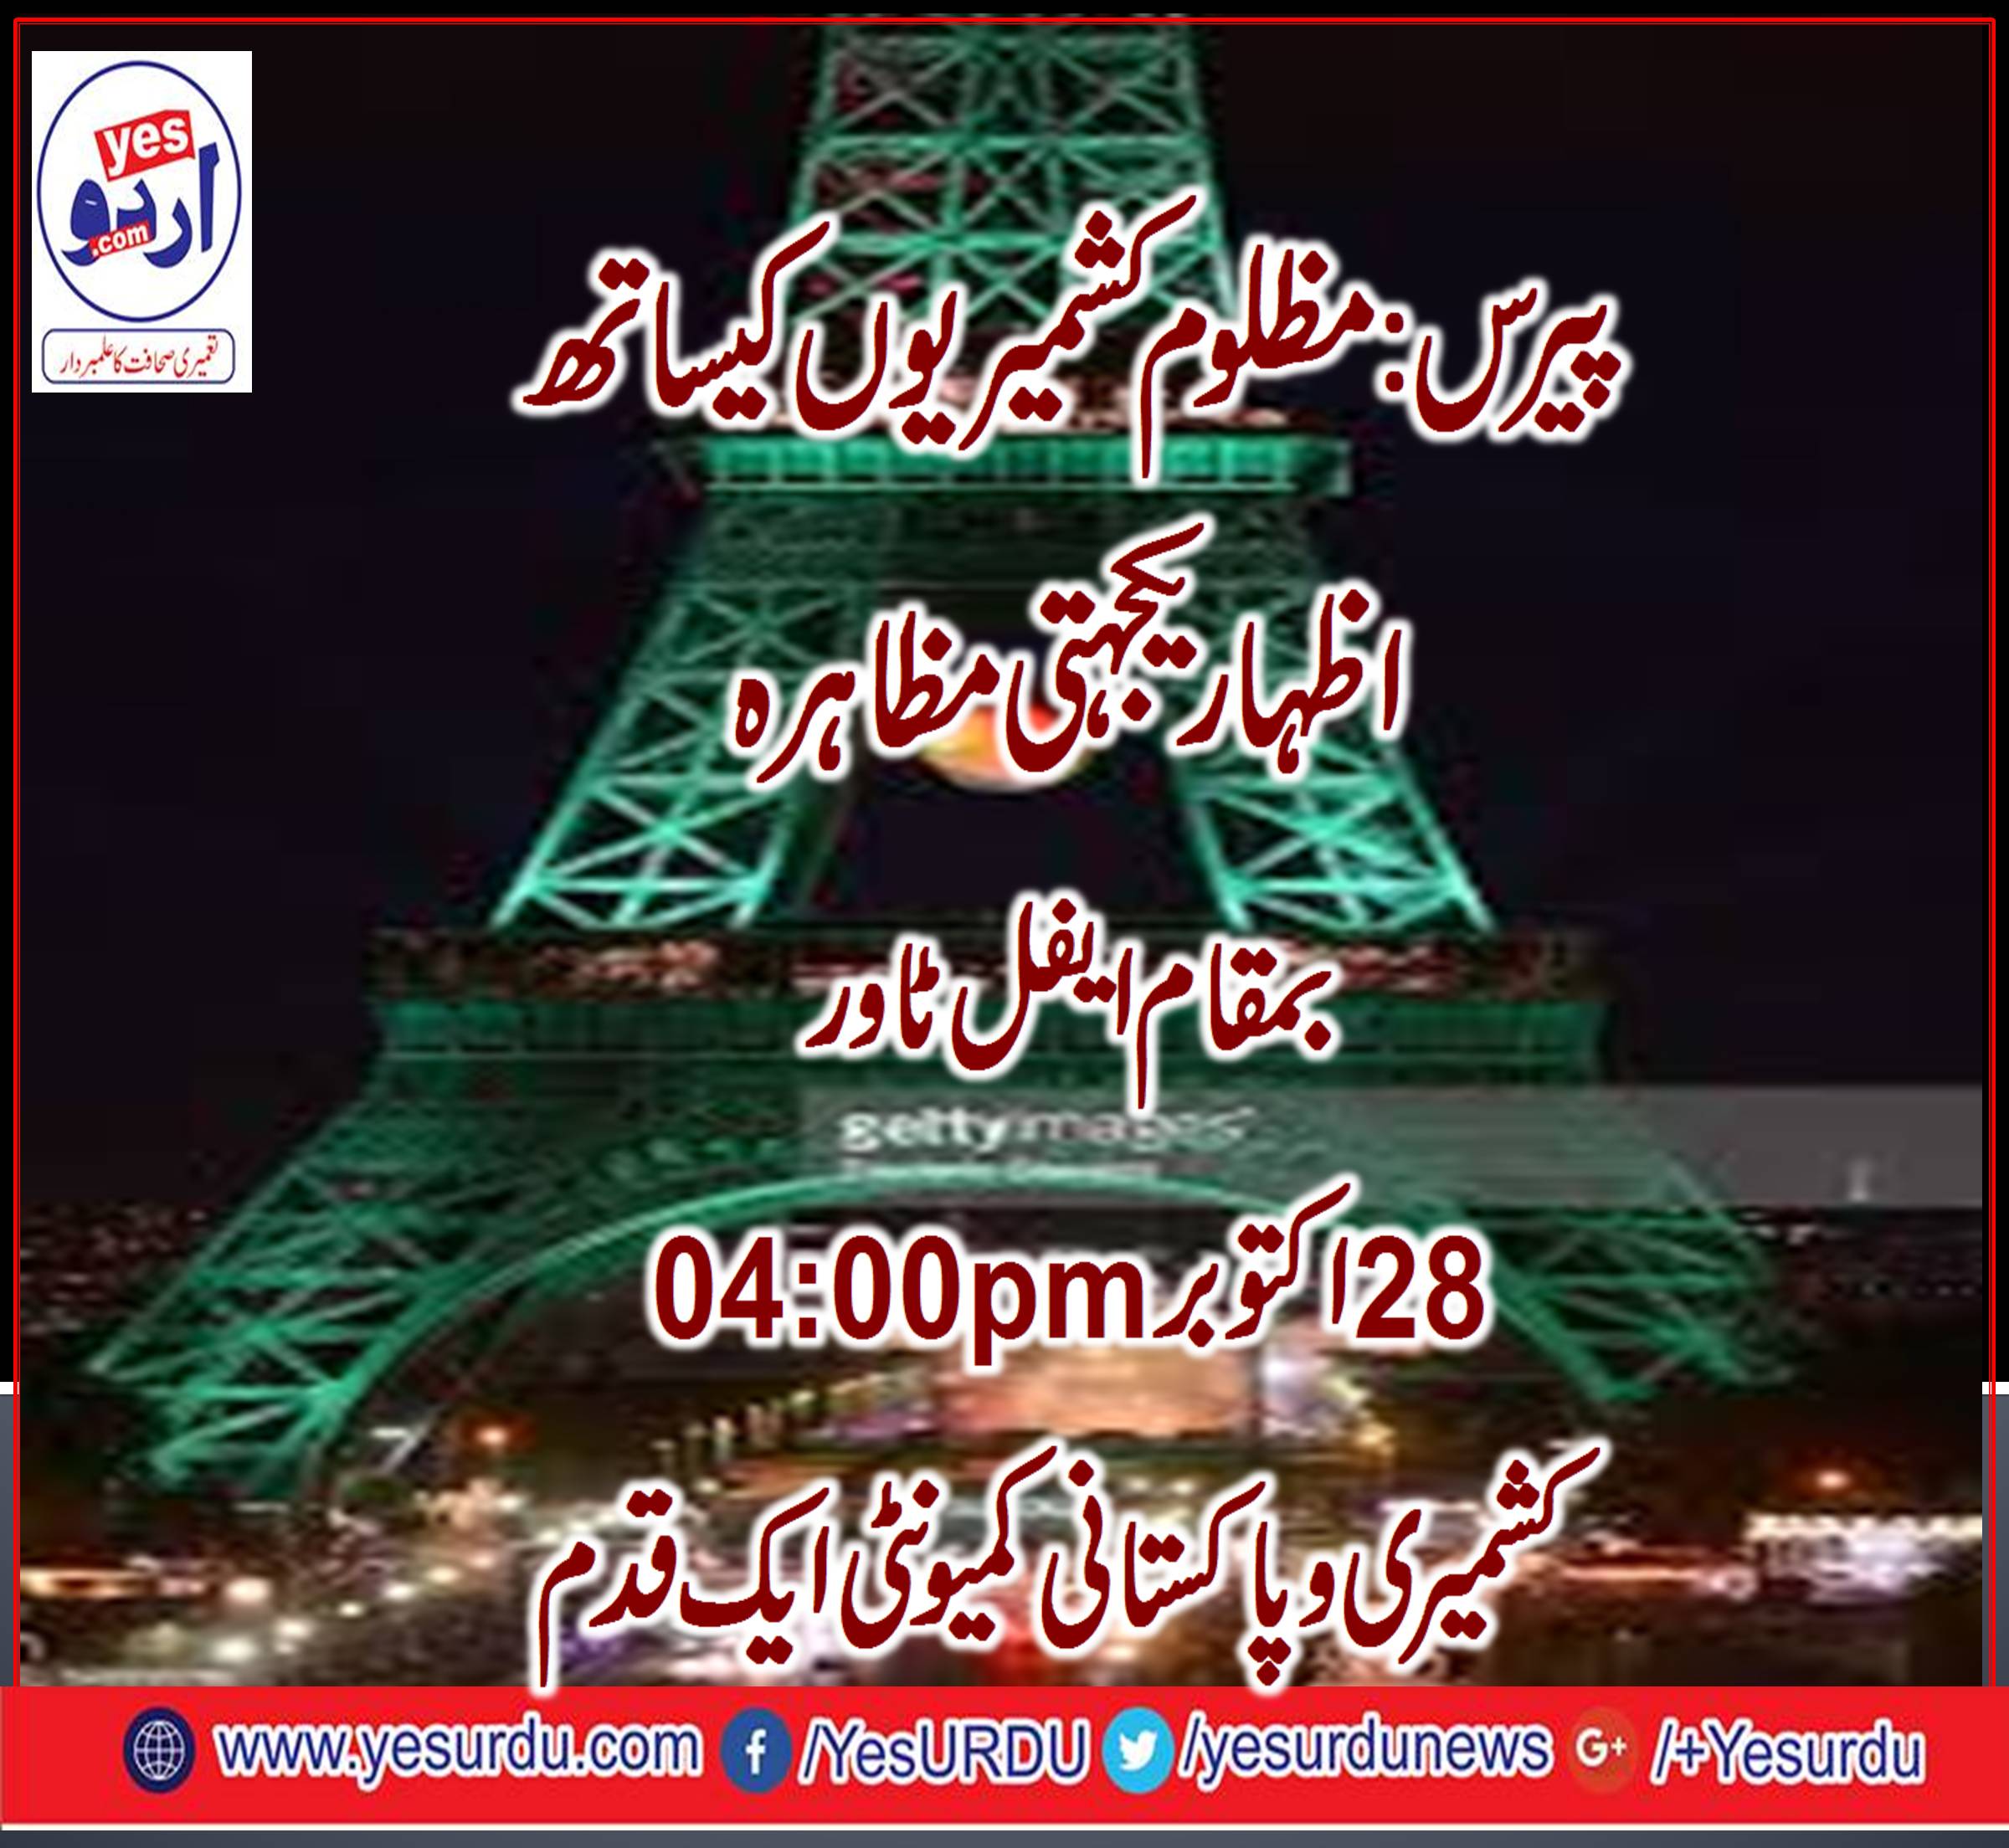 Pakistani, and, Kashmiri, Community, will, gathered, to, show, solidarity, with, Kashmir's, at, Eifel, Tower, France, on, 4 pm, 28, october, 2017 